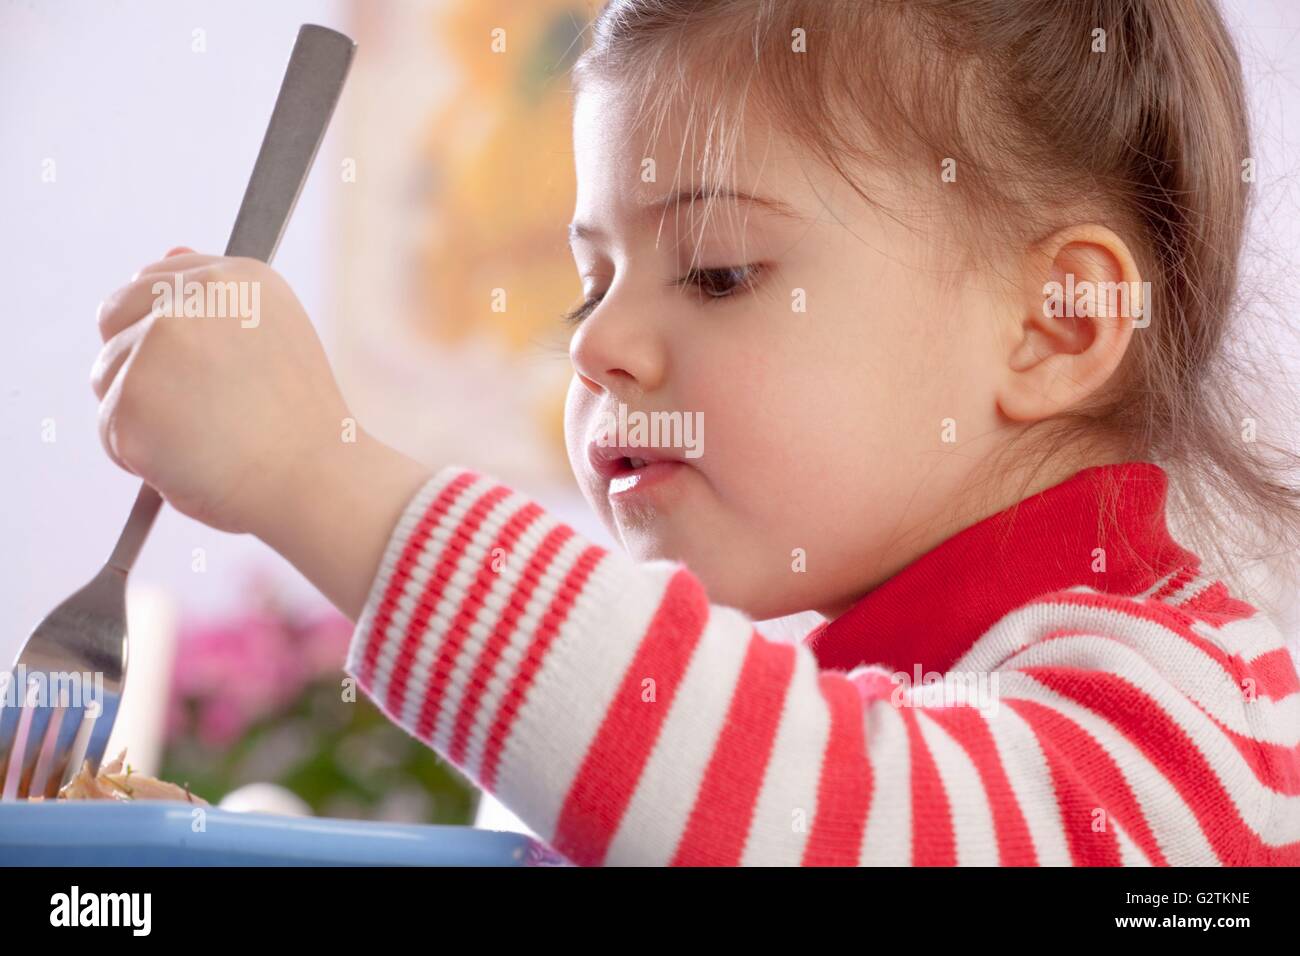 A little girl eating chicken Stock Photo